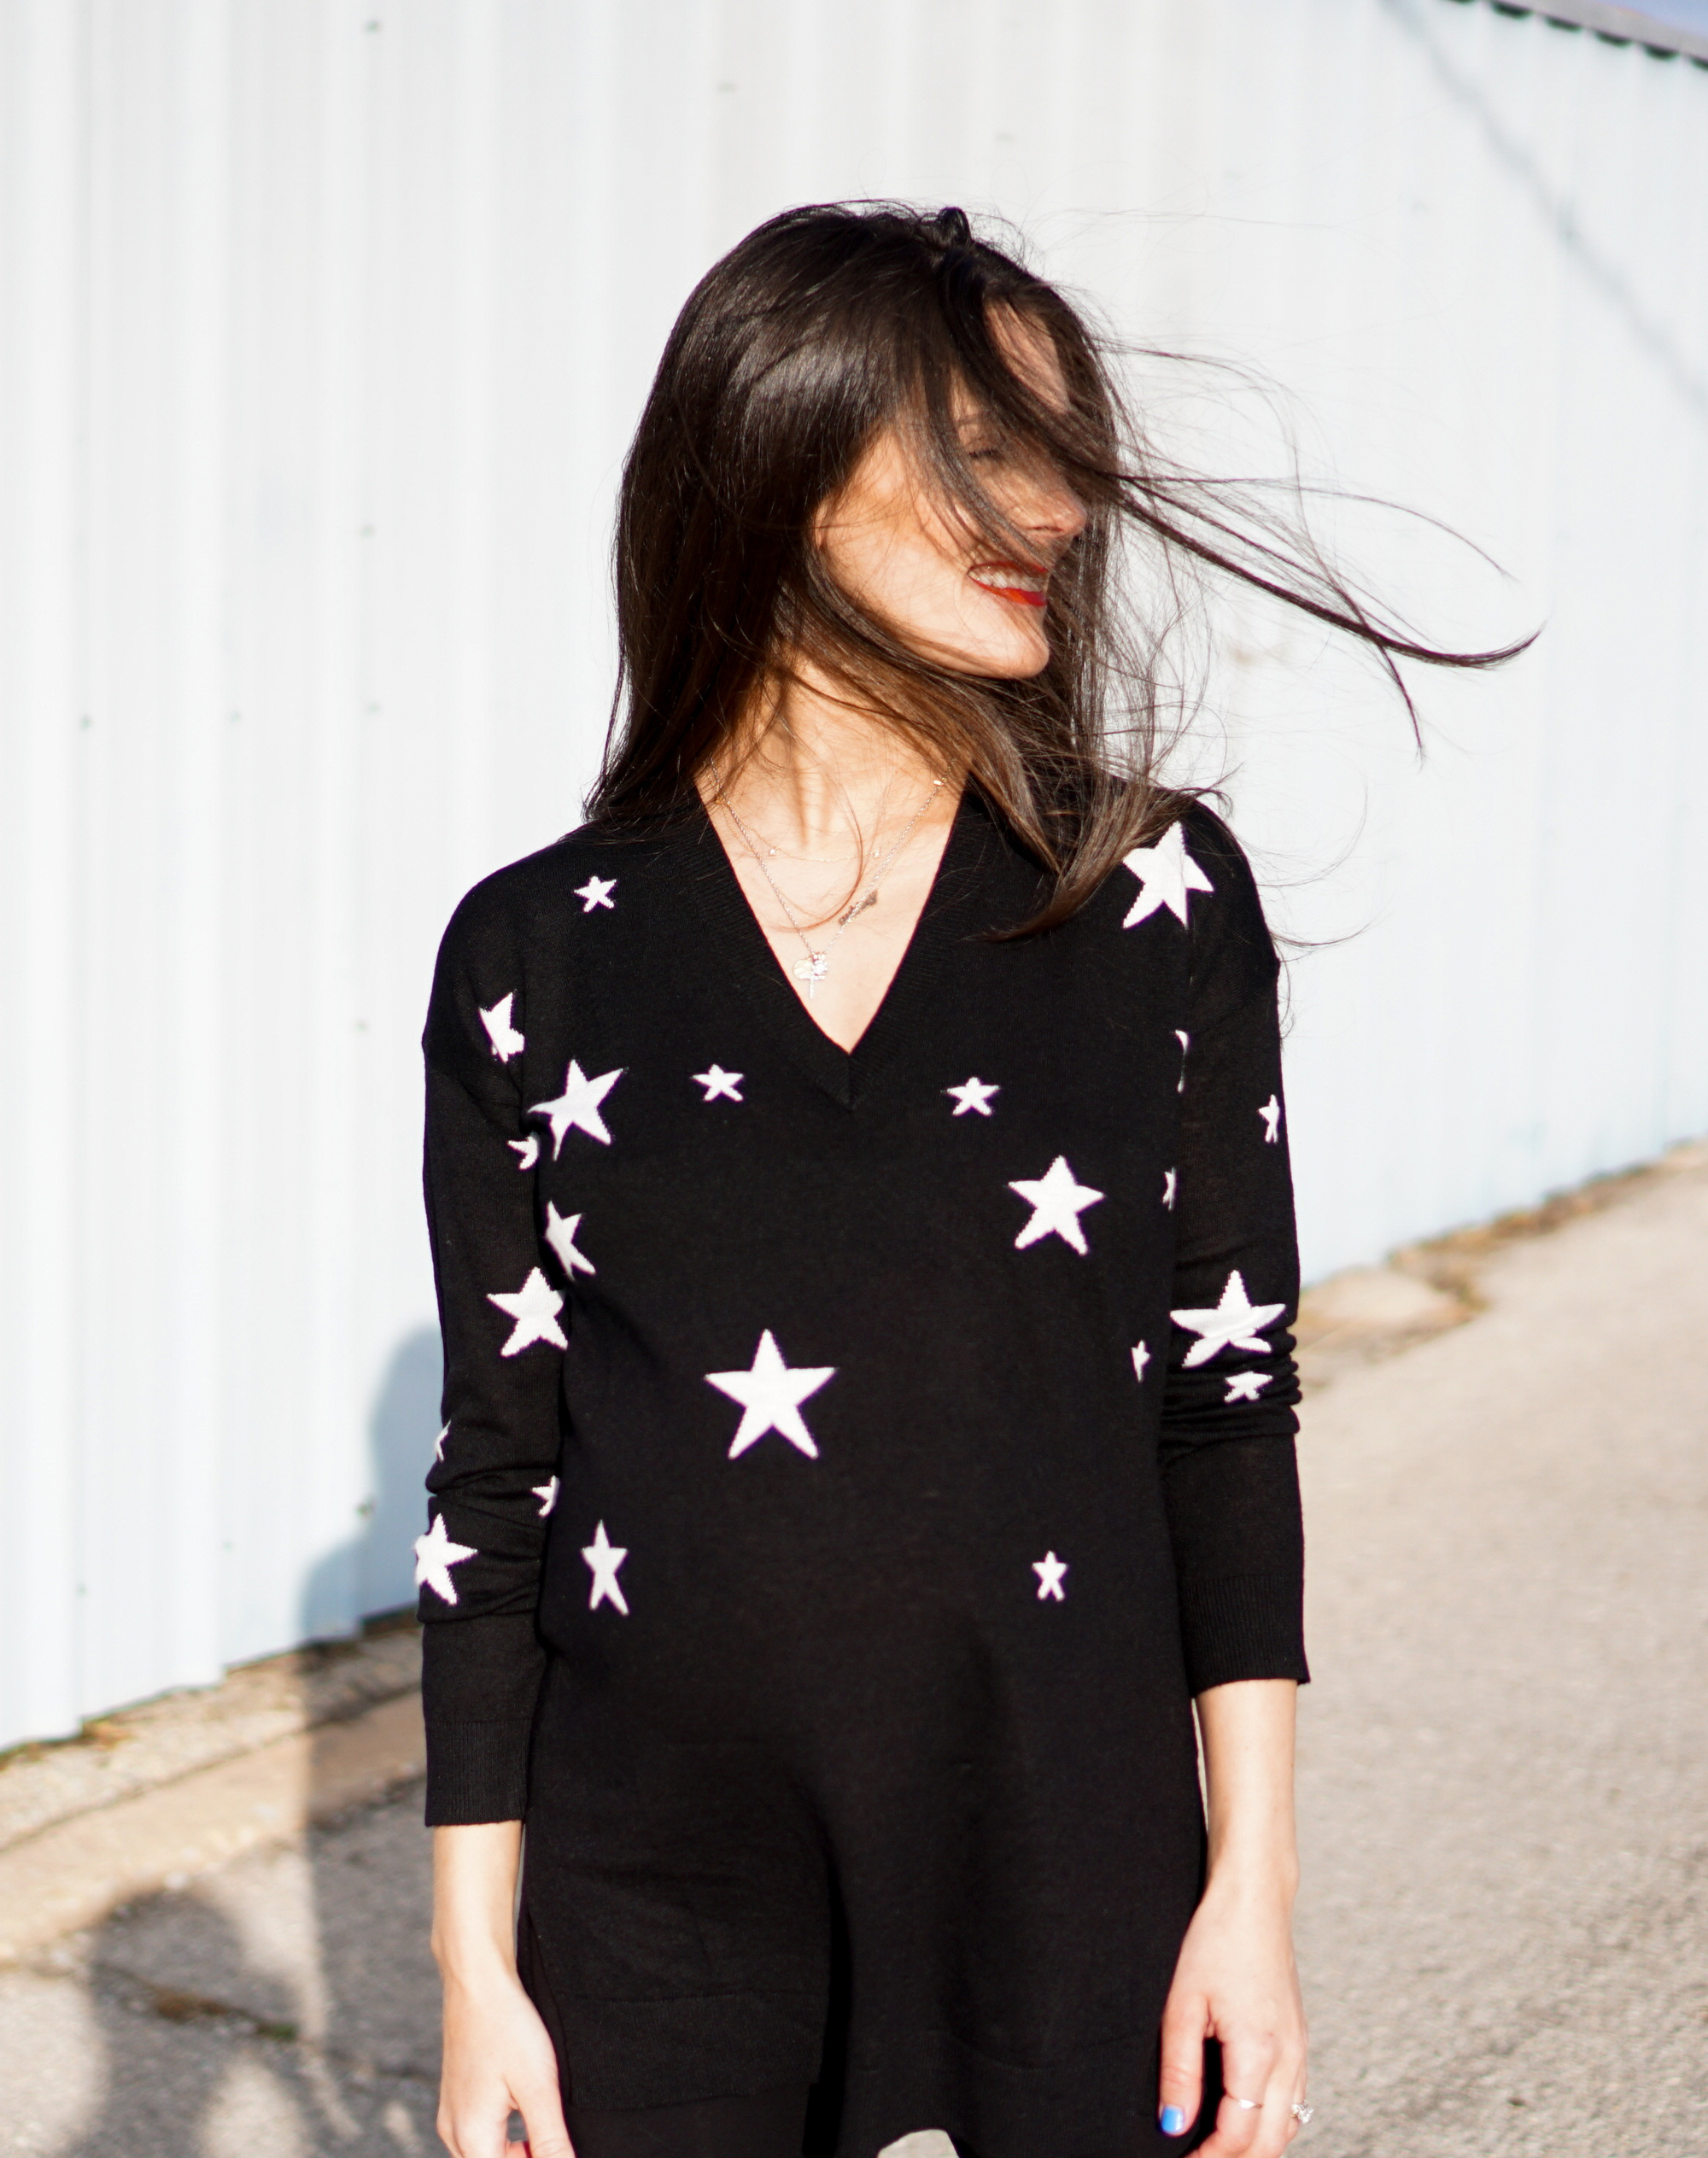 I'm on thedandyliar.com, styling this star intarsia knit sweater and black leggings from Isabella Oliver in my third trimester! The best part? They can be worn after pregnancy, which for me is in less than a week!